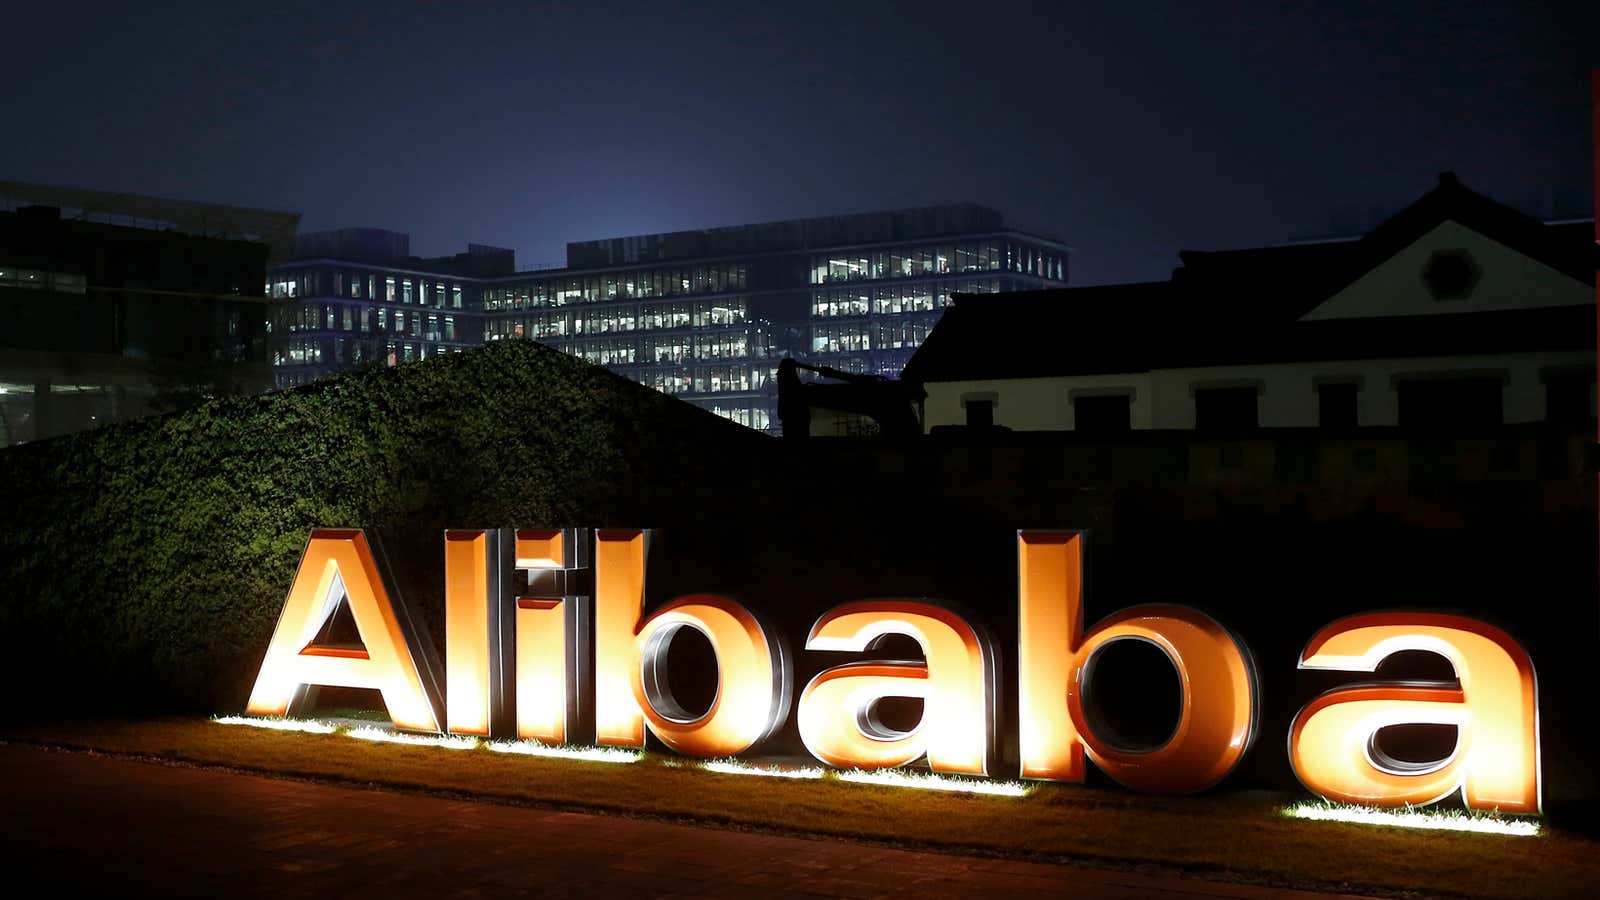 The Alibaba ecosystem is a conglomerate on its own terms